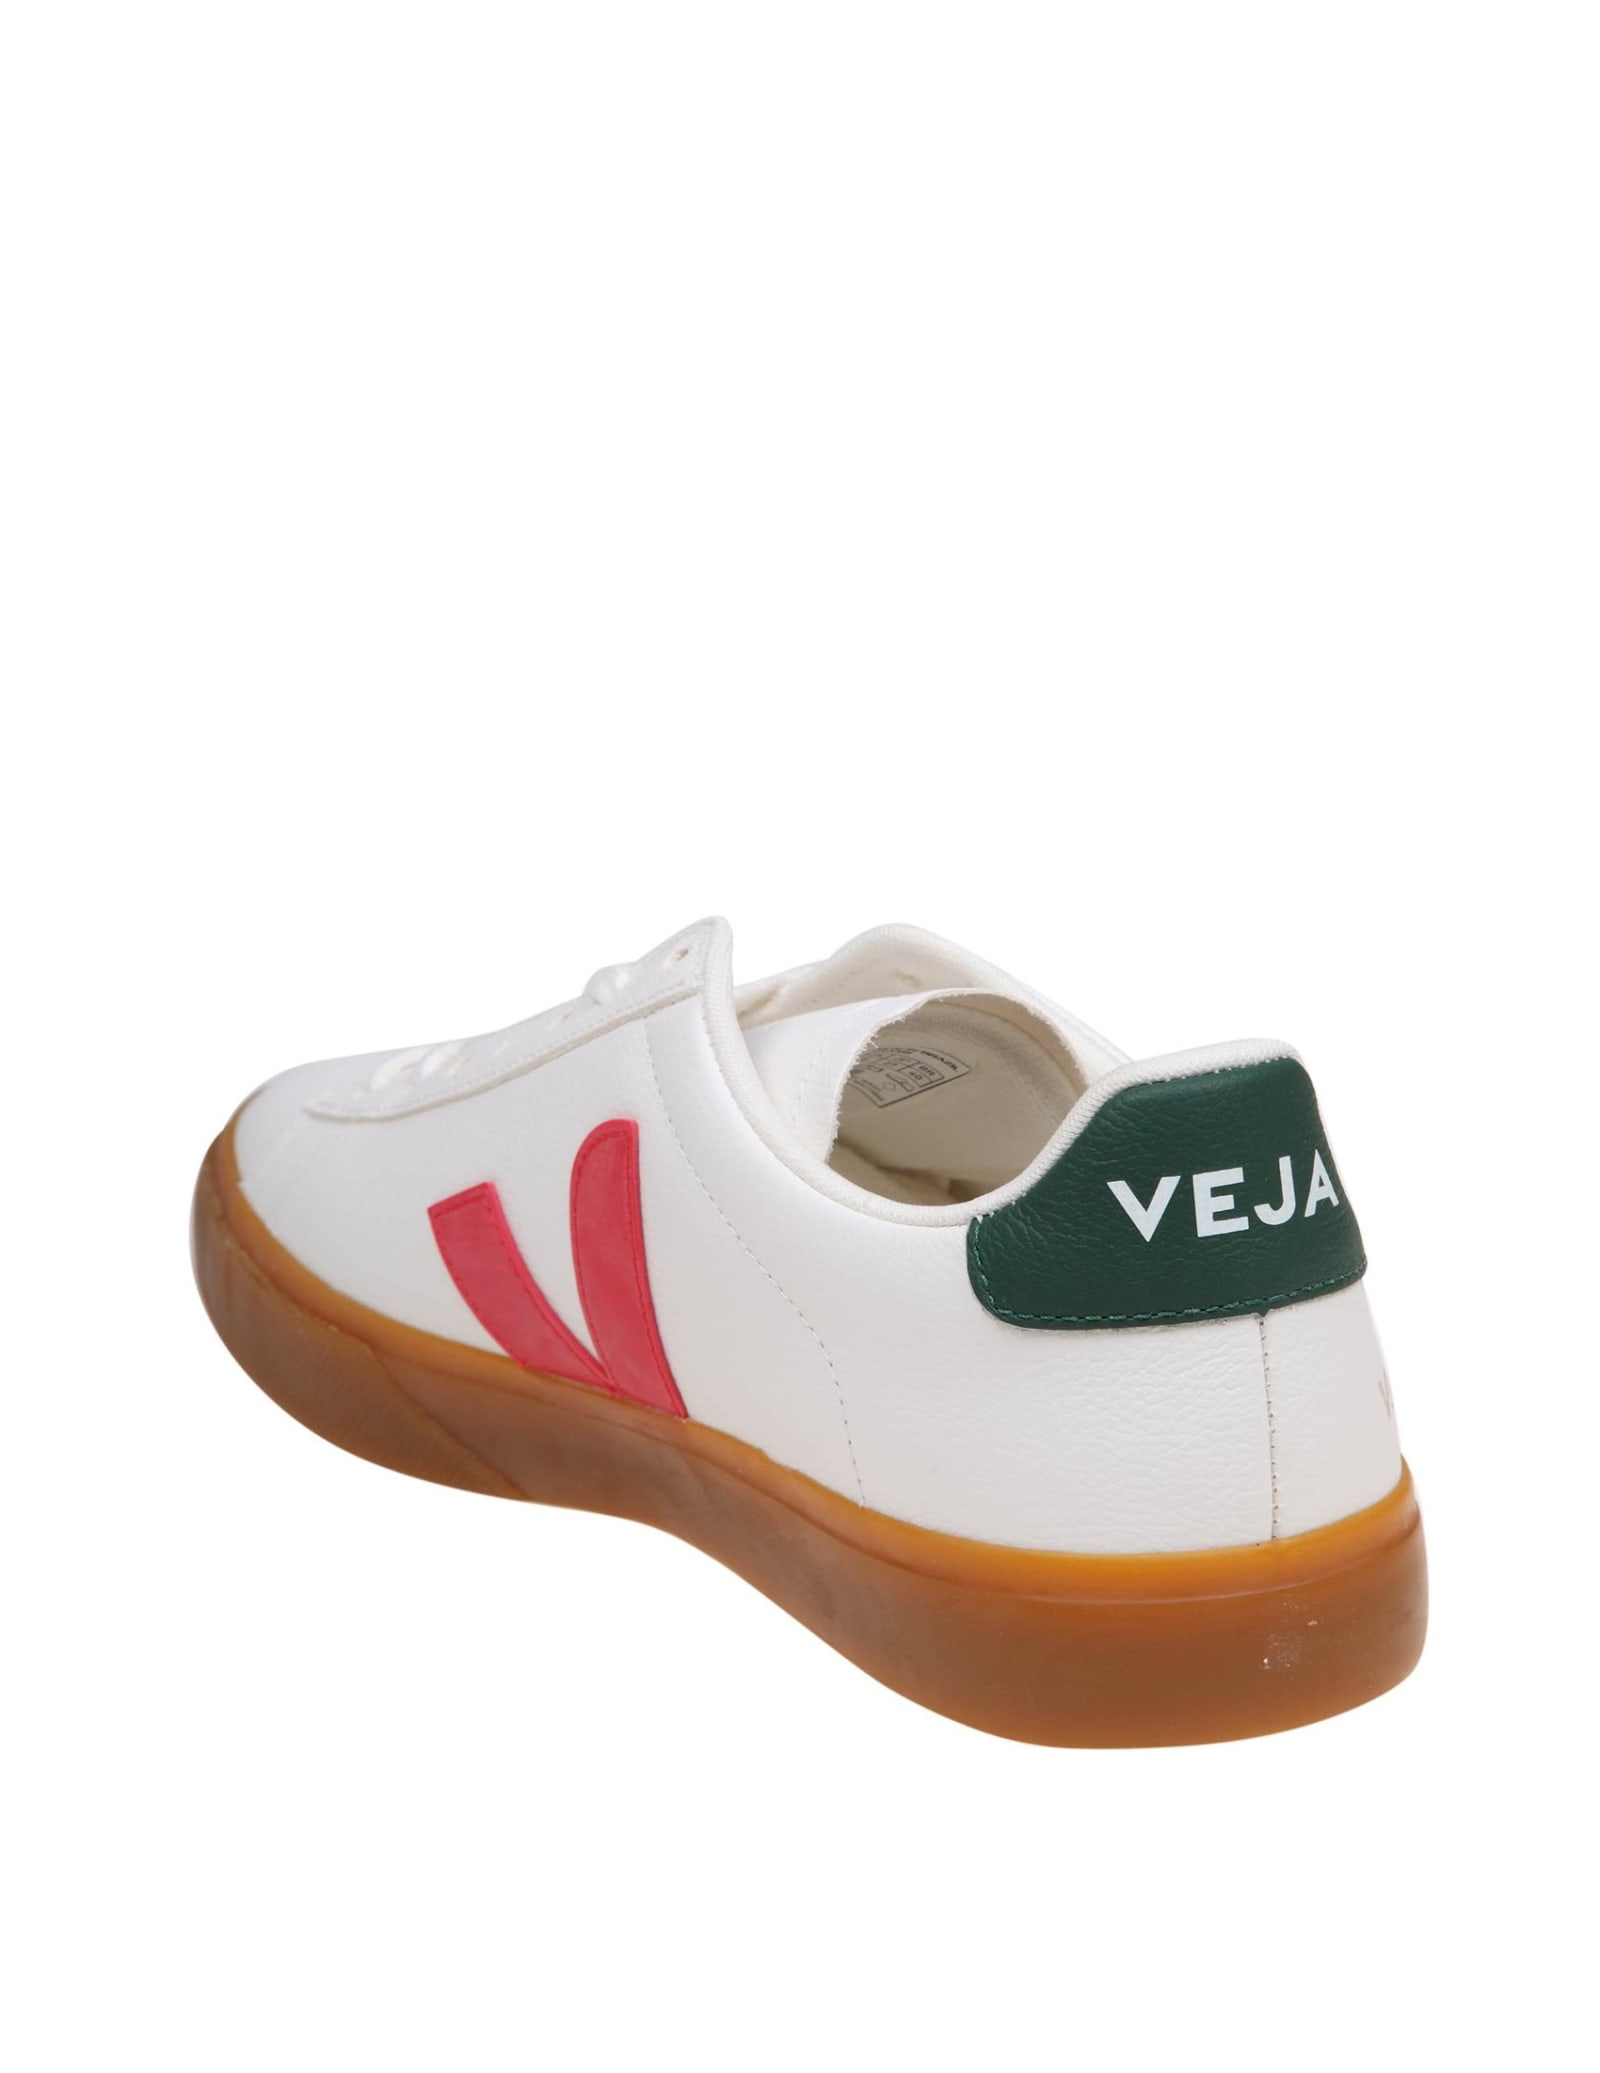 Shop Veja Campo Chromefree In White/red And Green Leather In White/poker